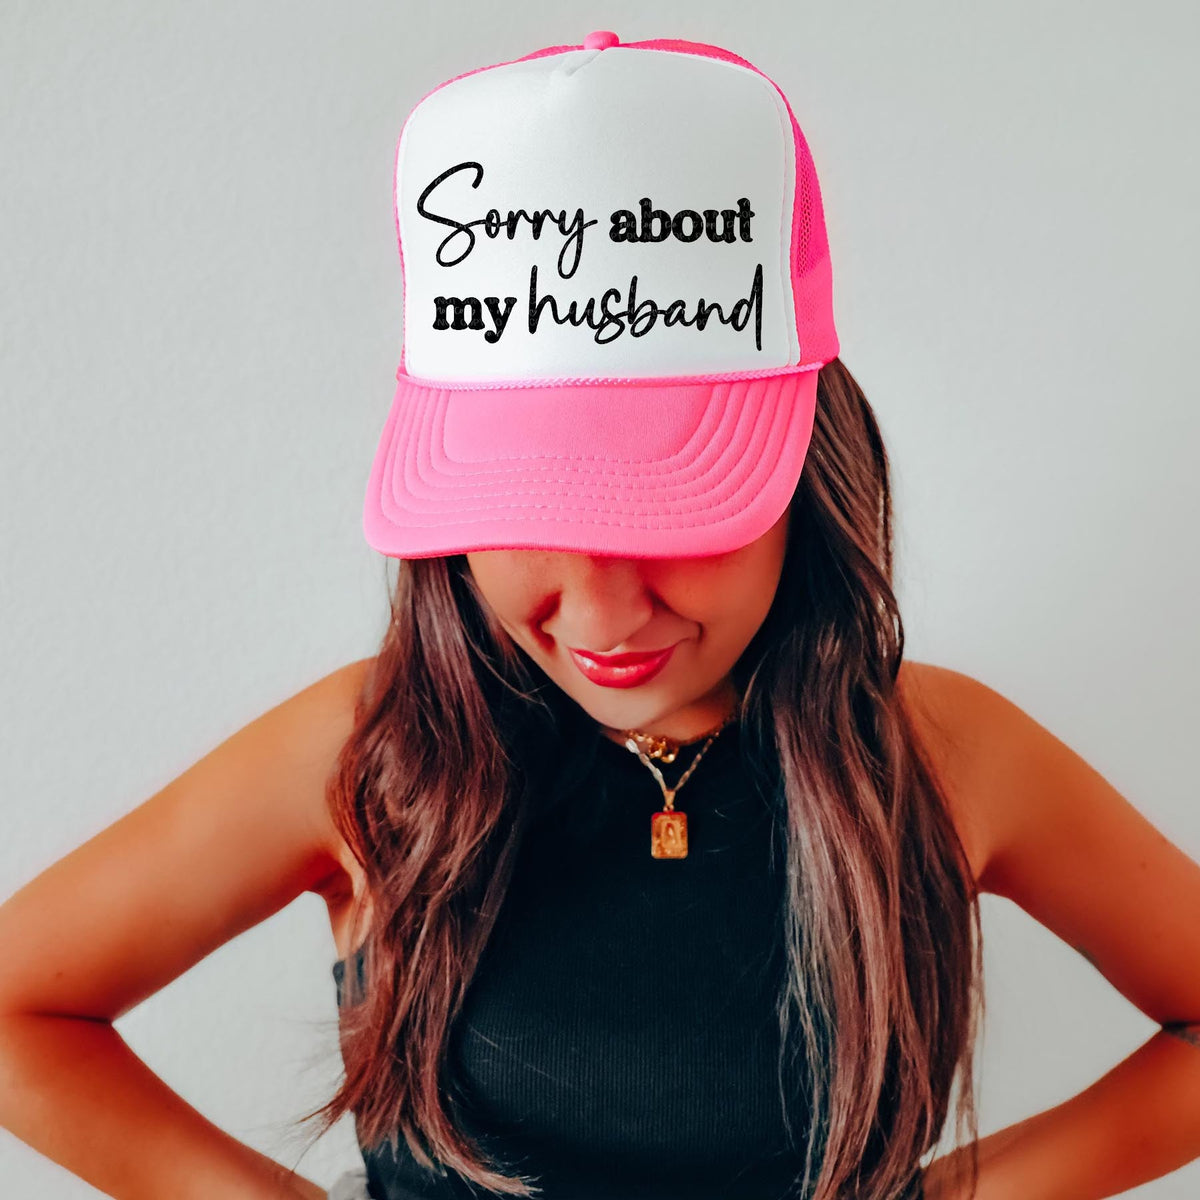 SORRY ABOUT MY HUSBAND  Hat allow 7 days to process + shipping time